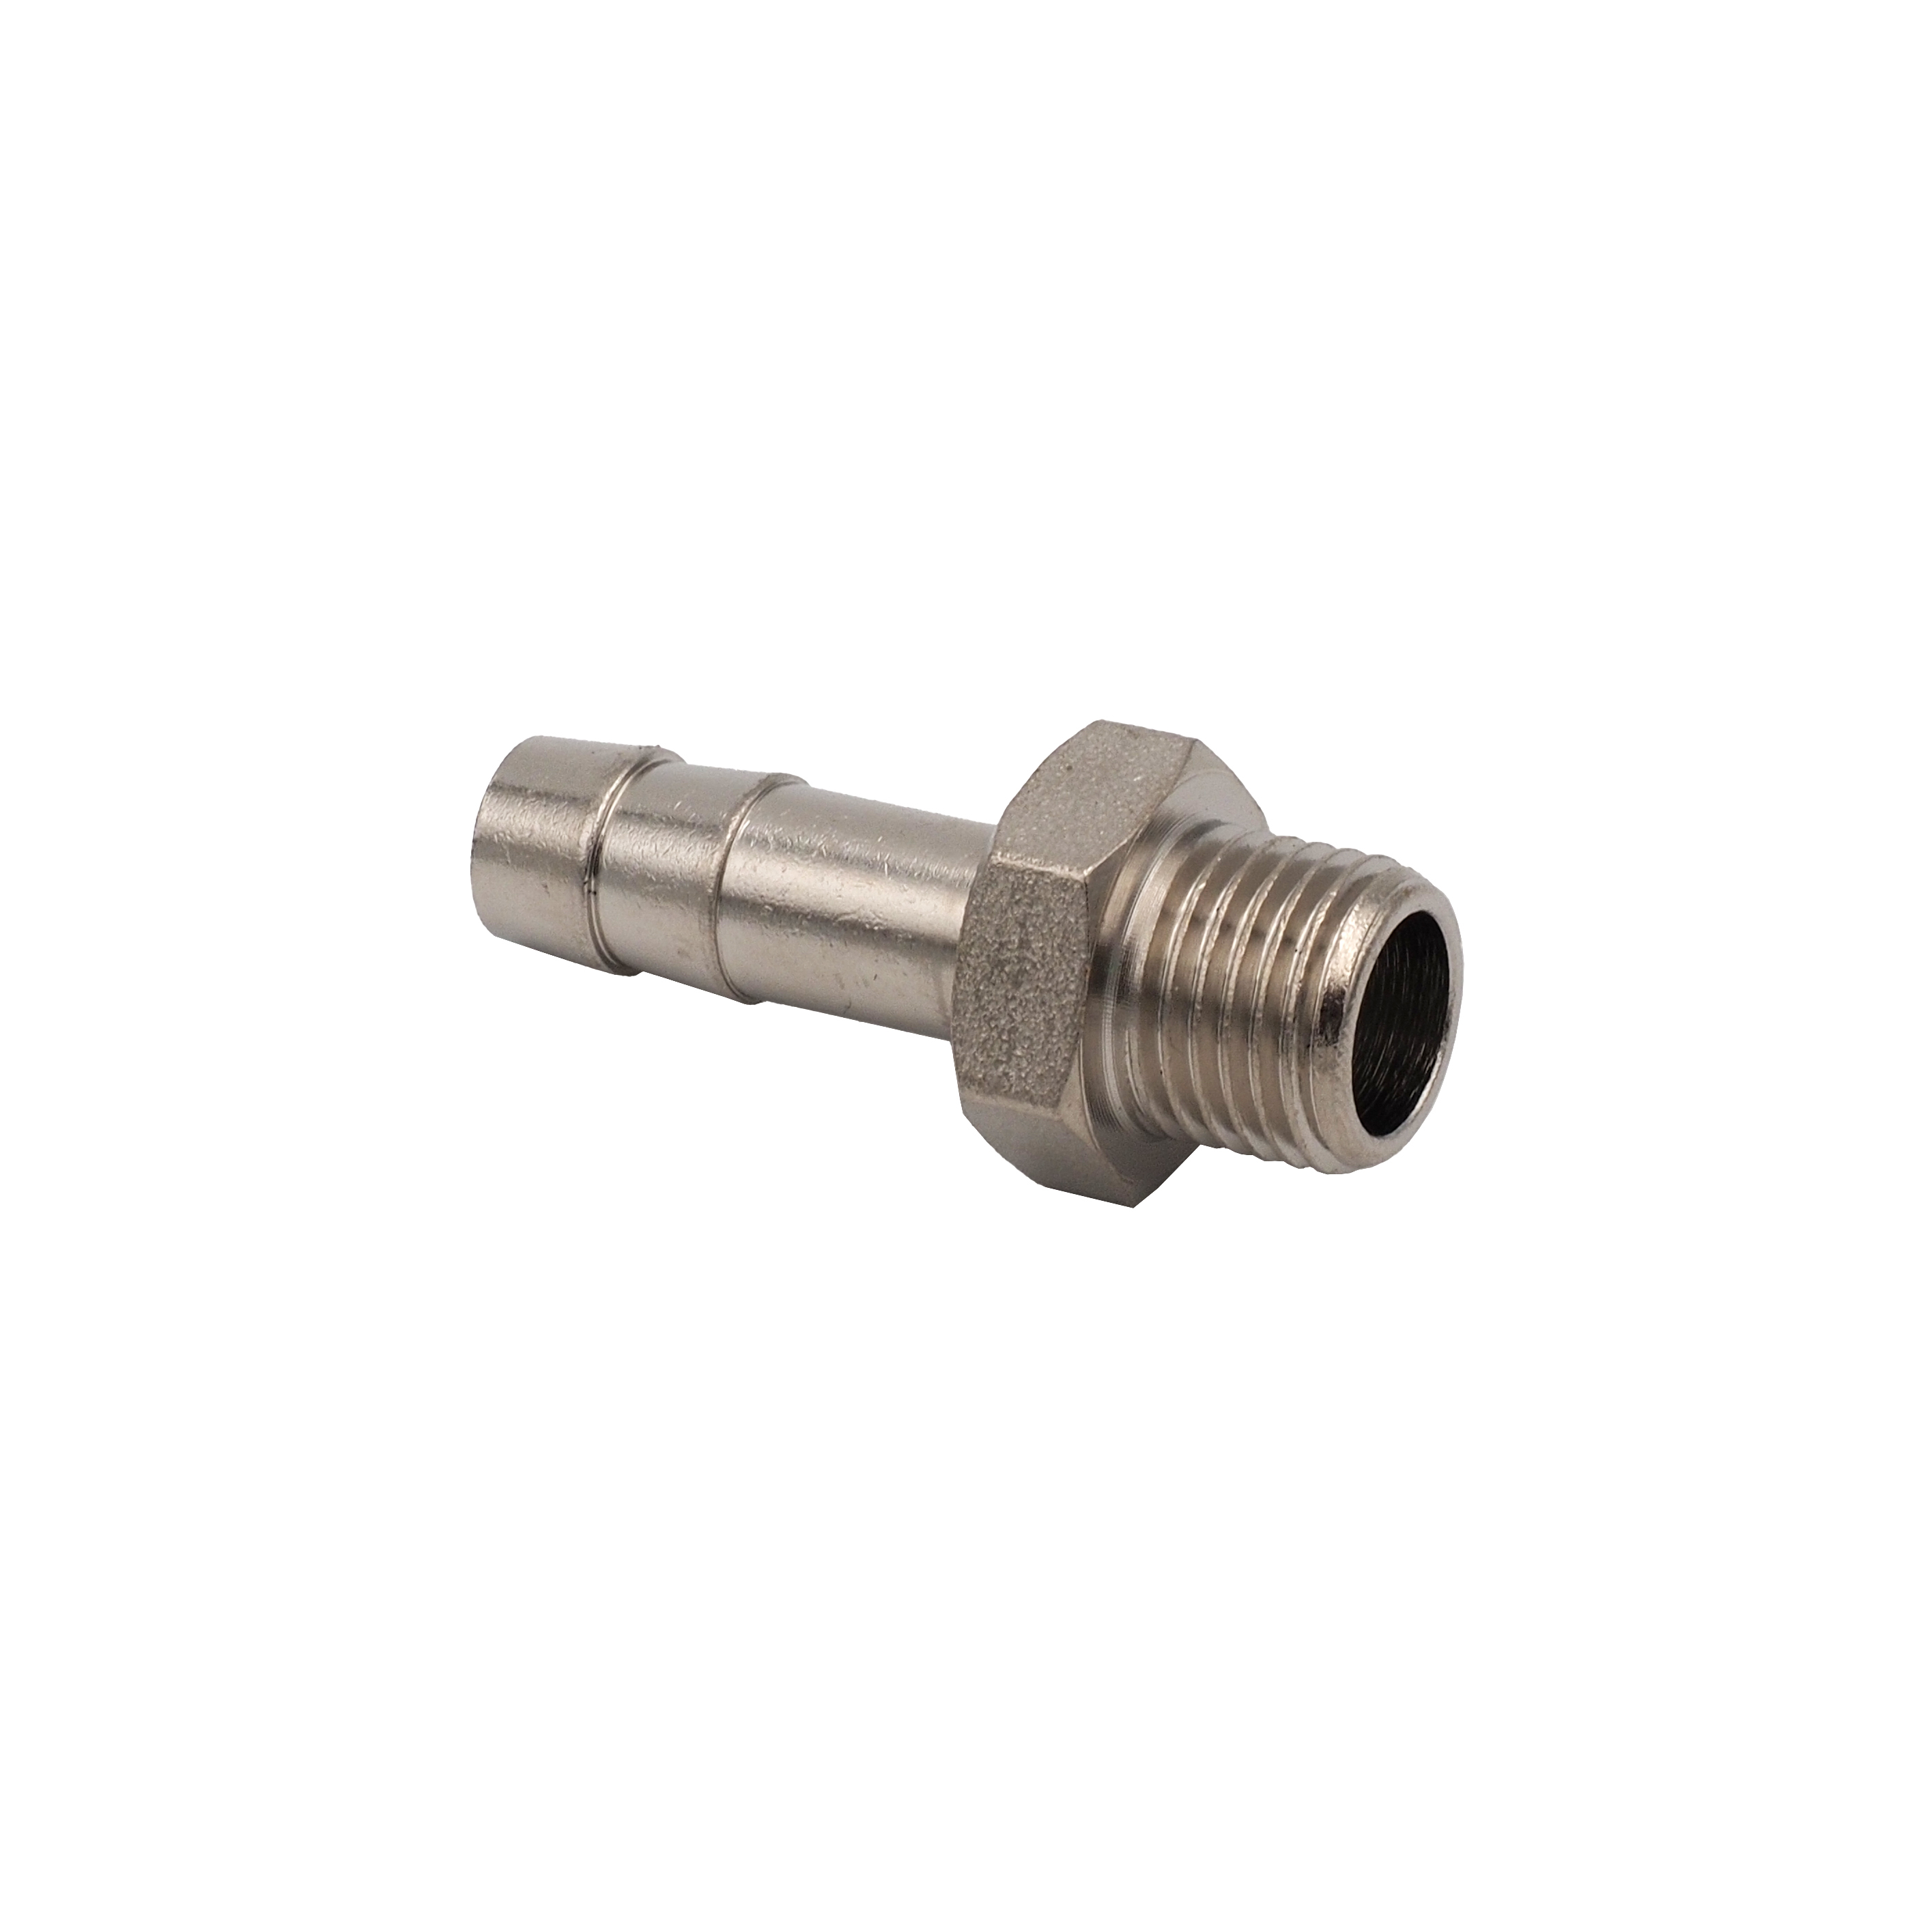 Hose nozzle 9mm G1/4 ET, nickel-plated brass